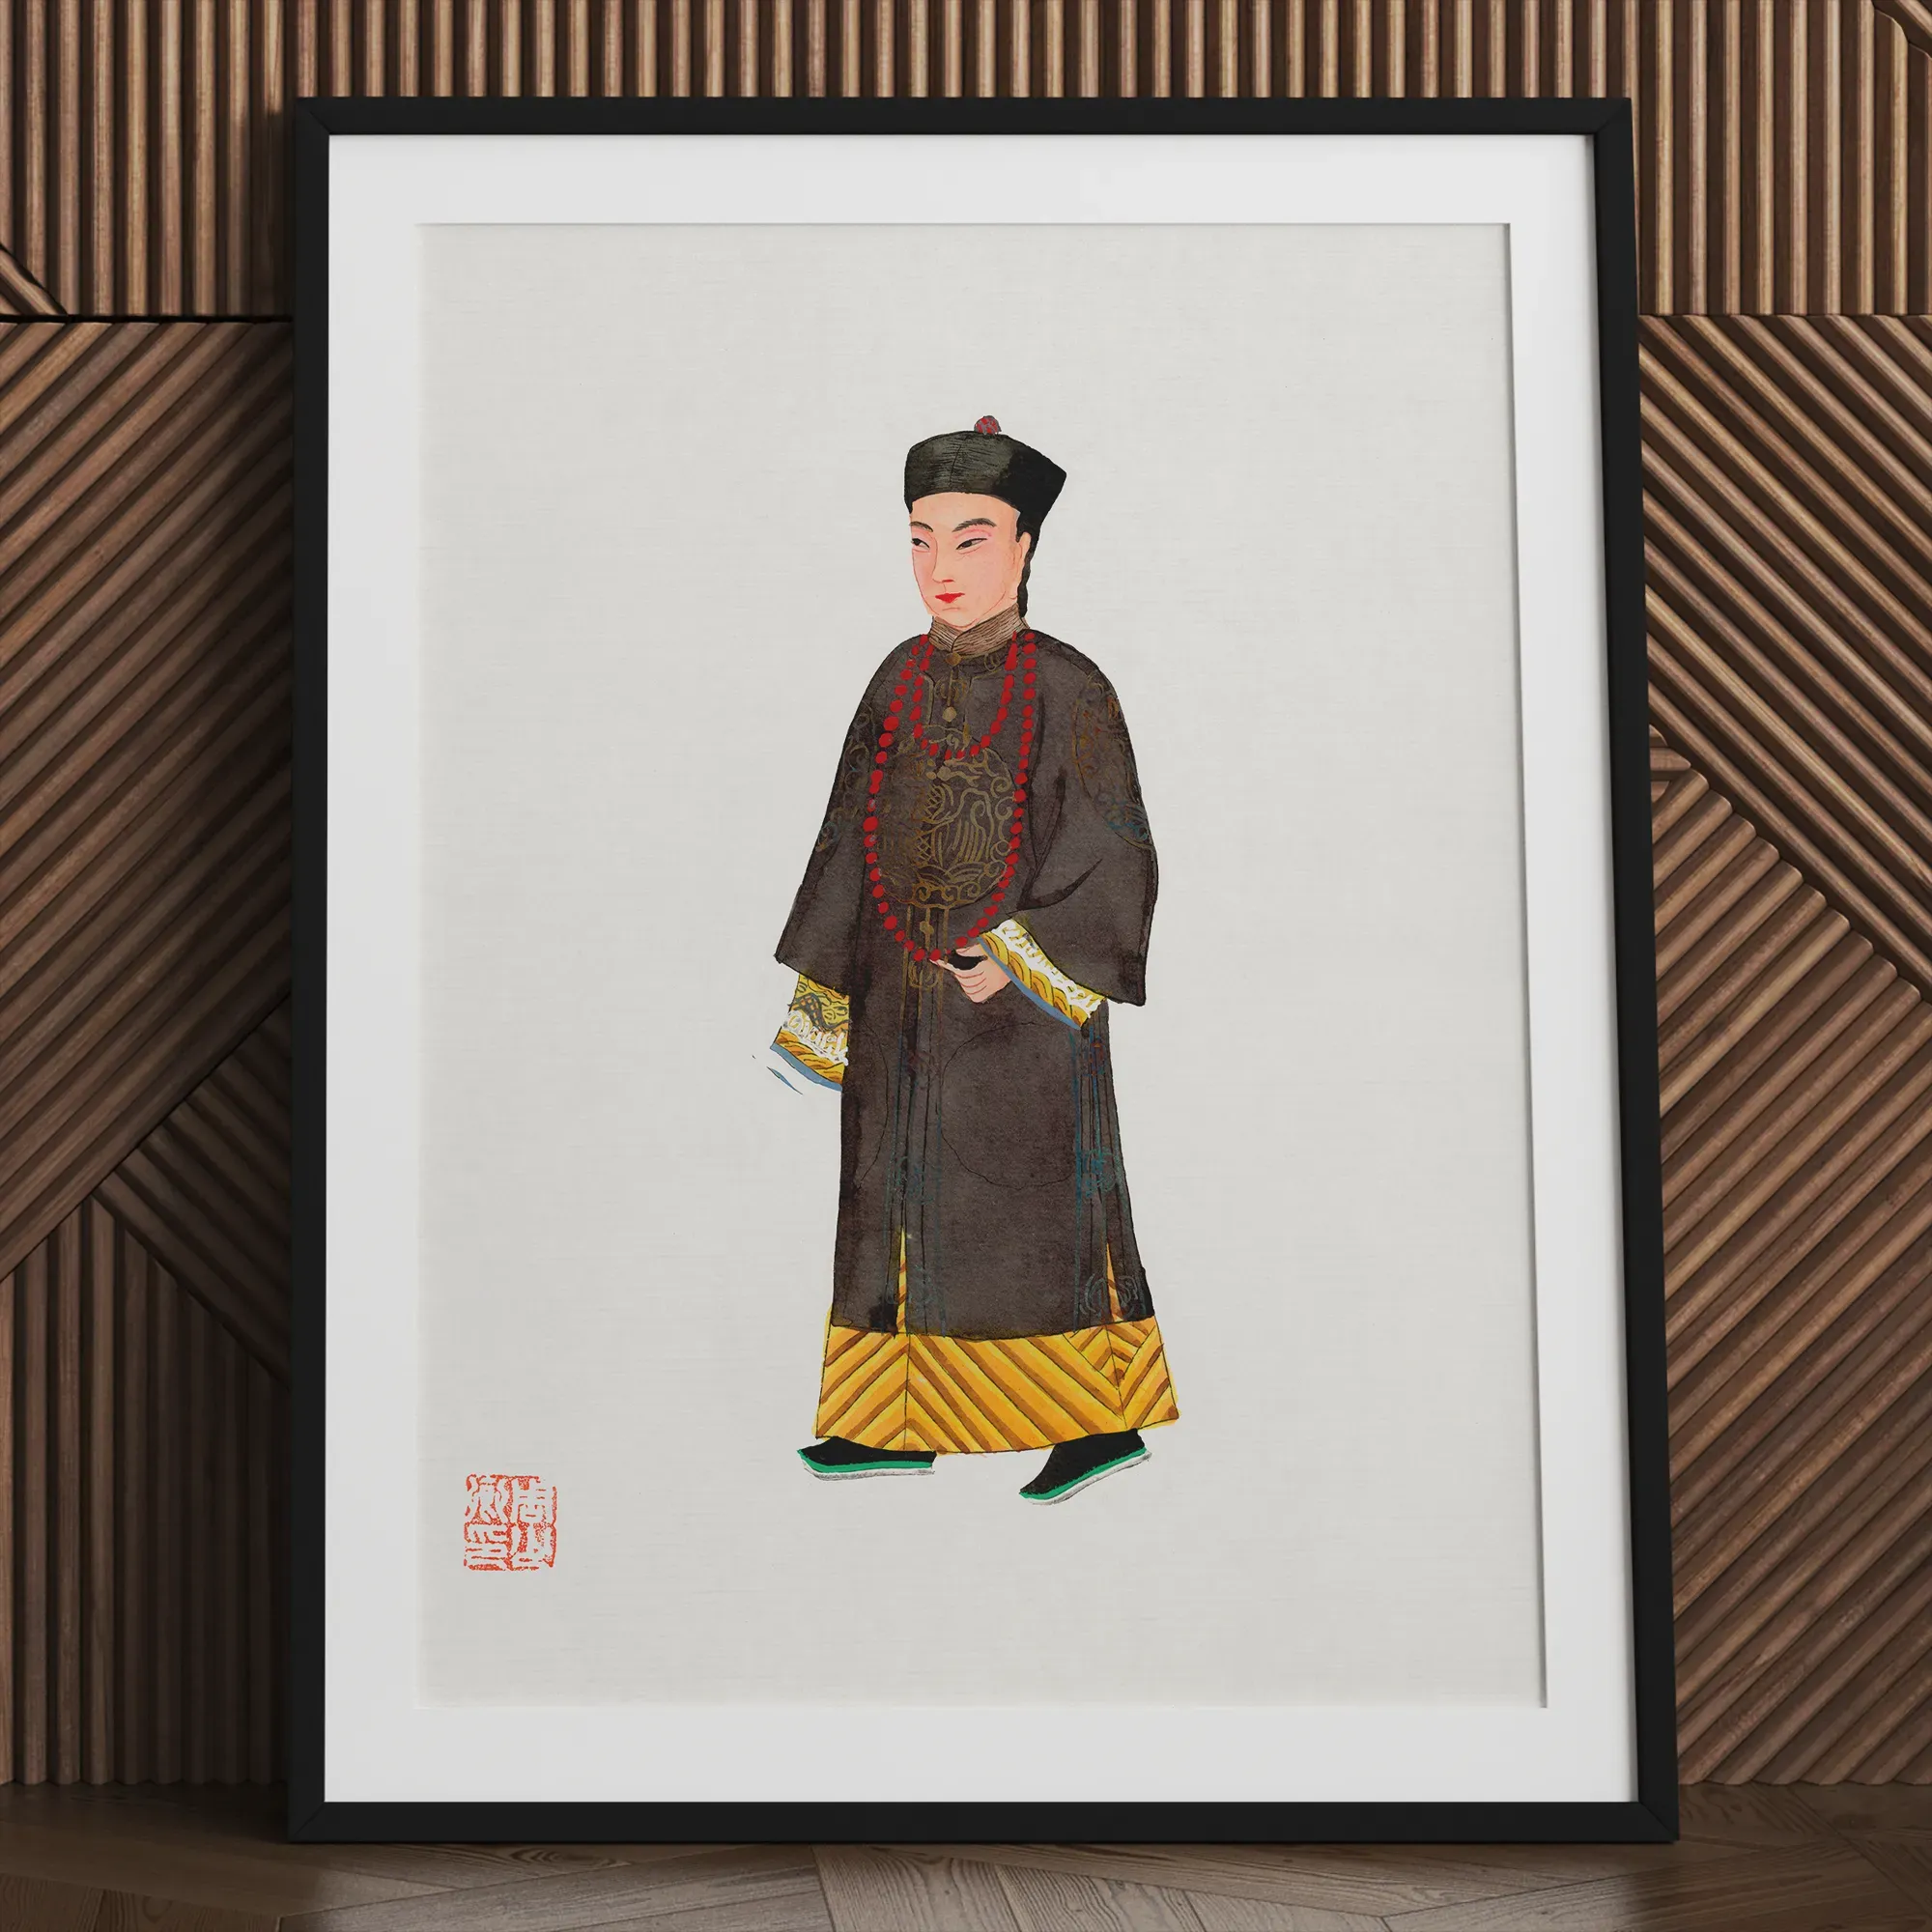 Chinese Emperor’s Courtier Framed & Mounted Print - Posters Prints & Visual Artwork - Aesthetic Art